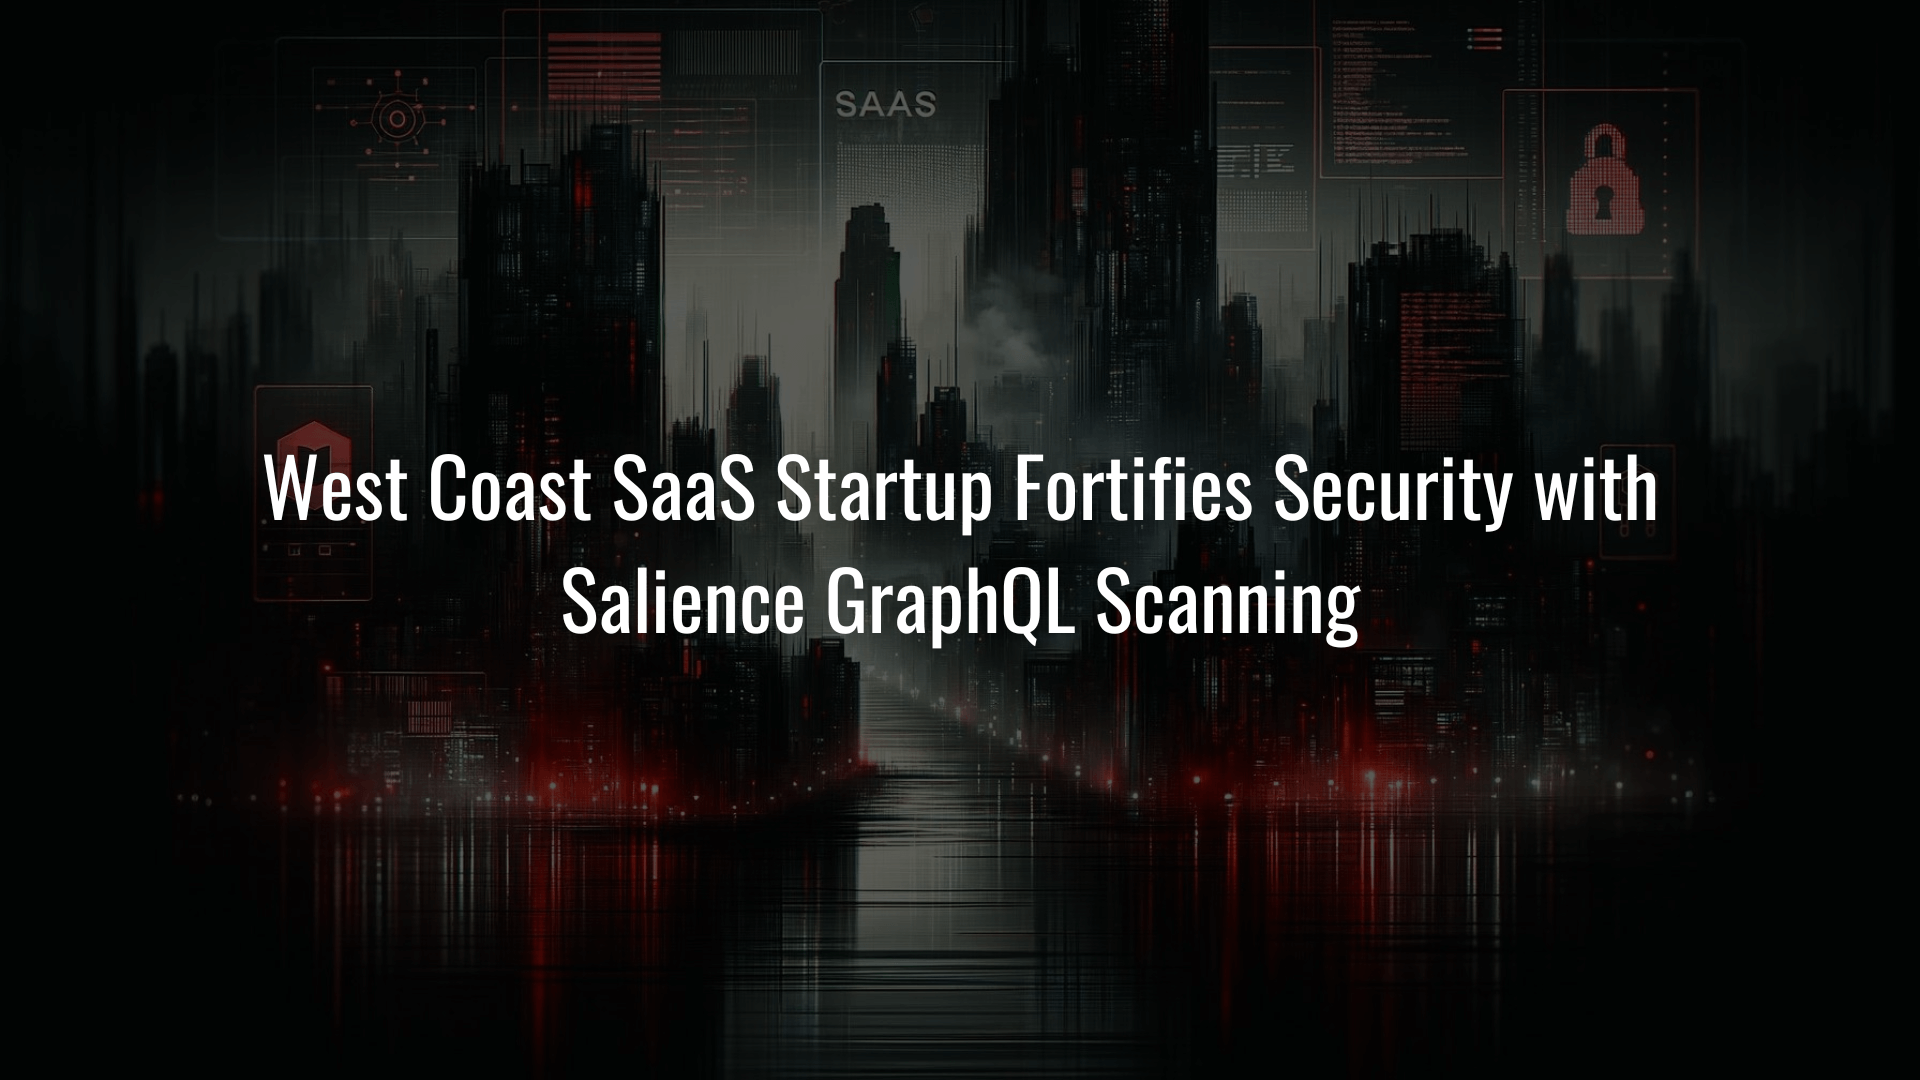 https://humanize.security//fs/1704987983832/bYhU5/West Coast SaaS Startup Fortifies Security .png